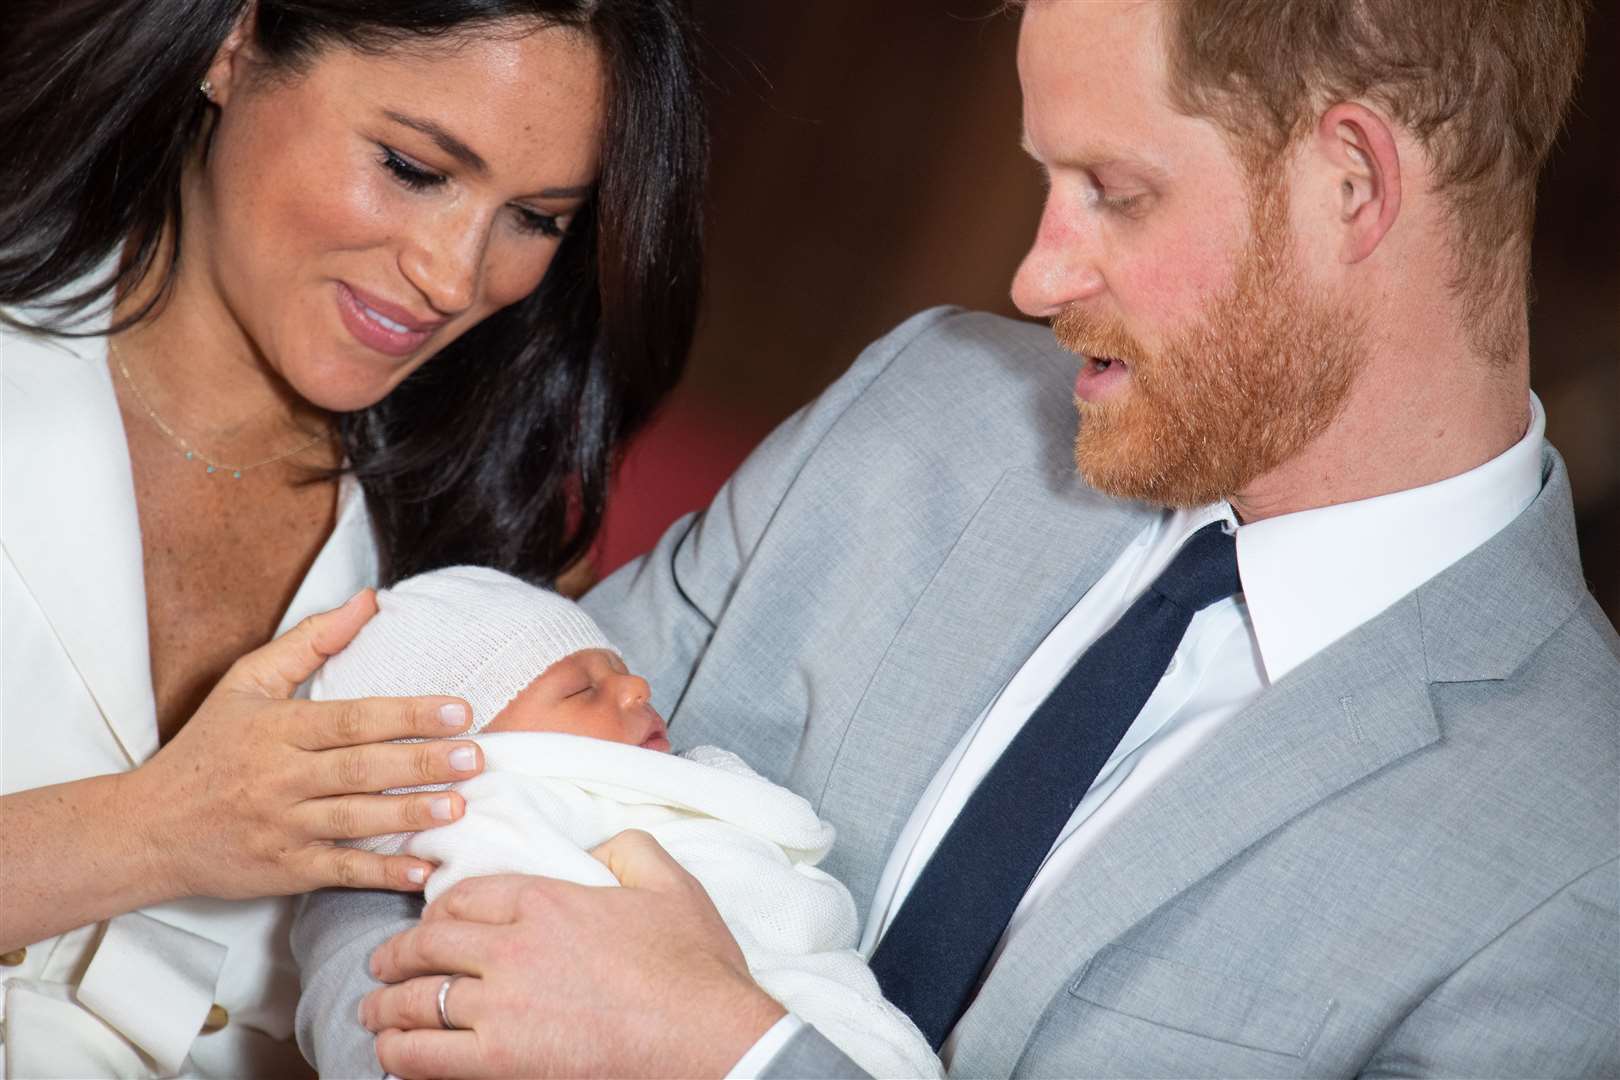 The Duke and Duchess of Sussex with their baby son Archie Harrison Mountbatten-Windsor, who was born on Monday morning, during a photocall in St George's Hall at Windsor Castle in Berkshire. Pic Dominic Lipinski PA